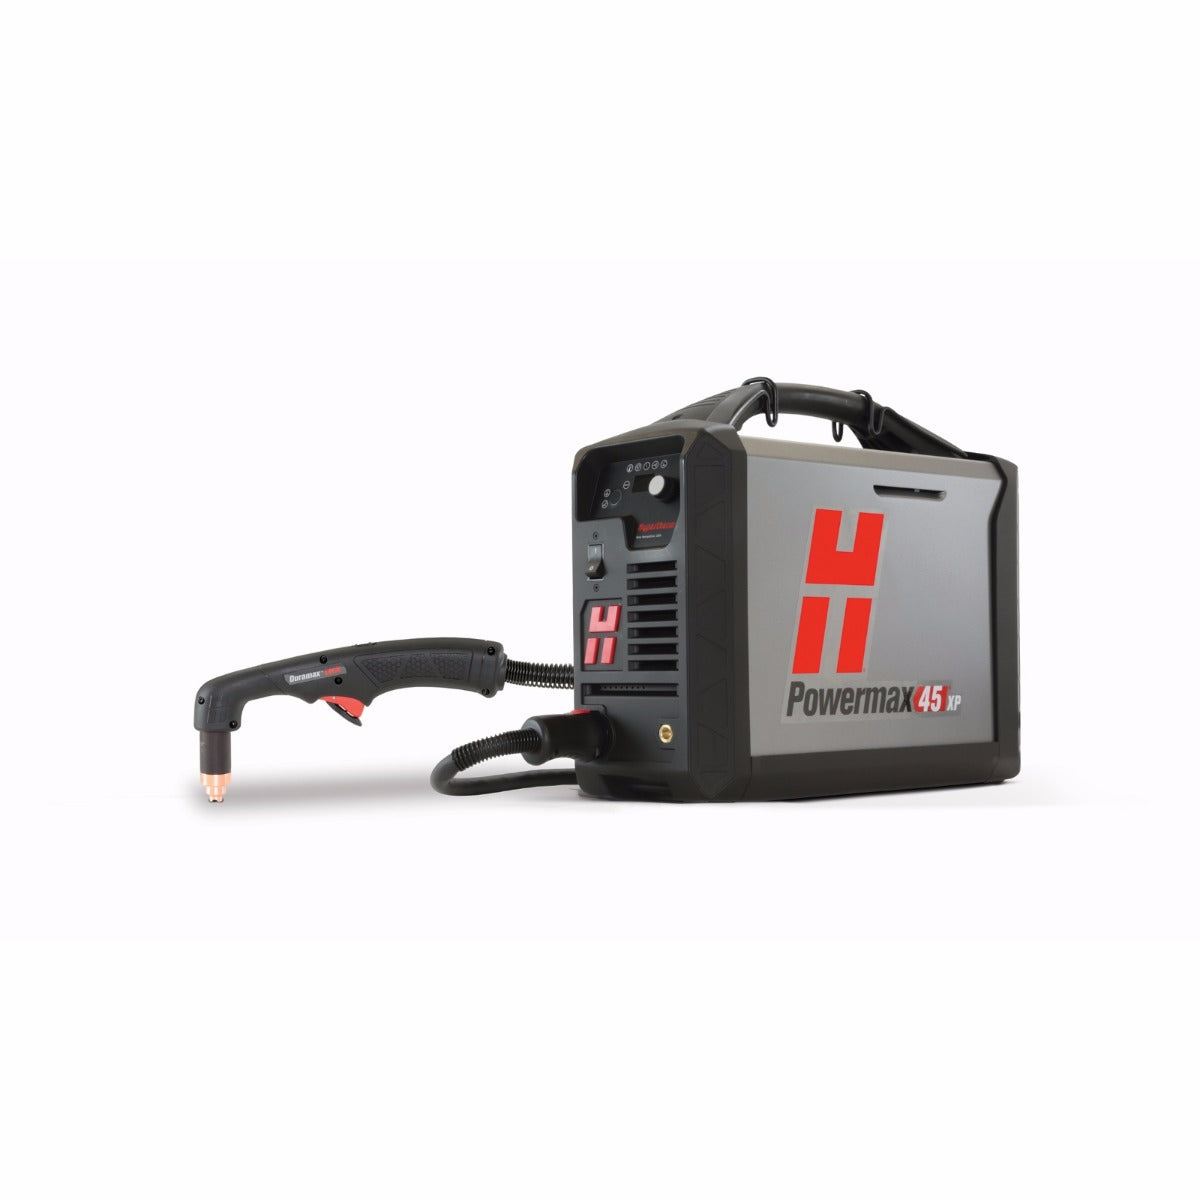 Hypertherm Powermax45 XP Plasma Cutter with 50ft Hand Torch (088114)